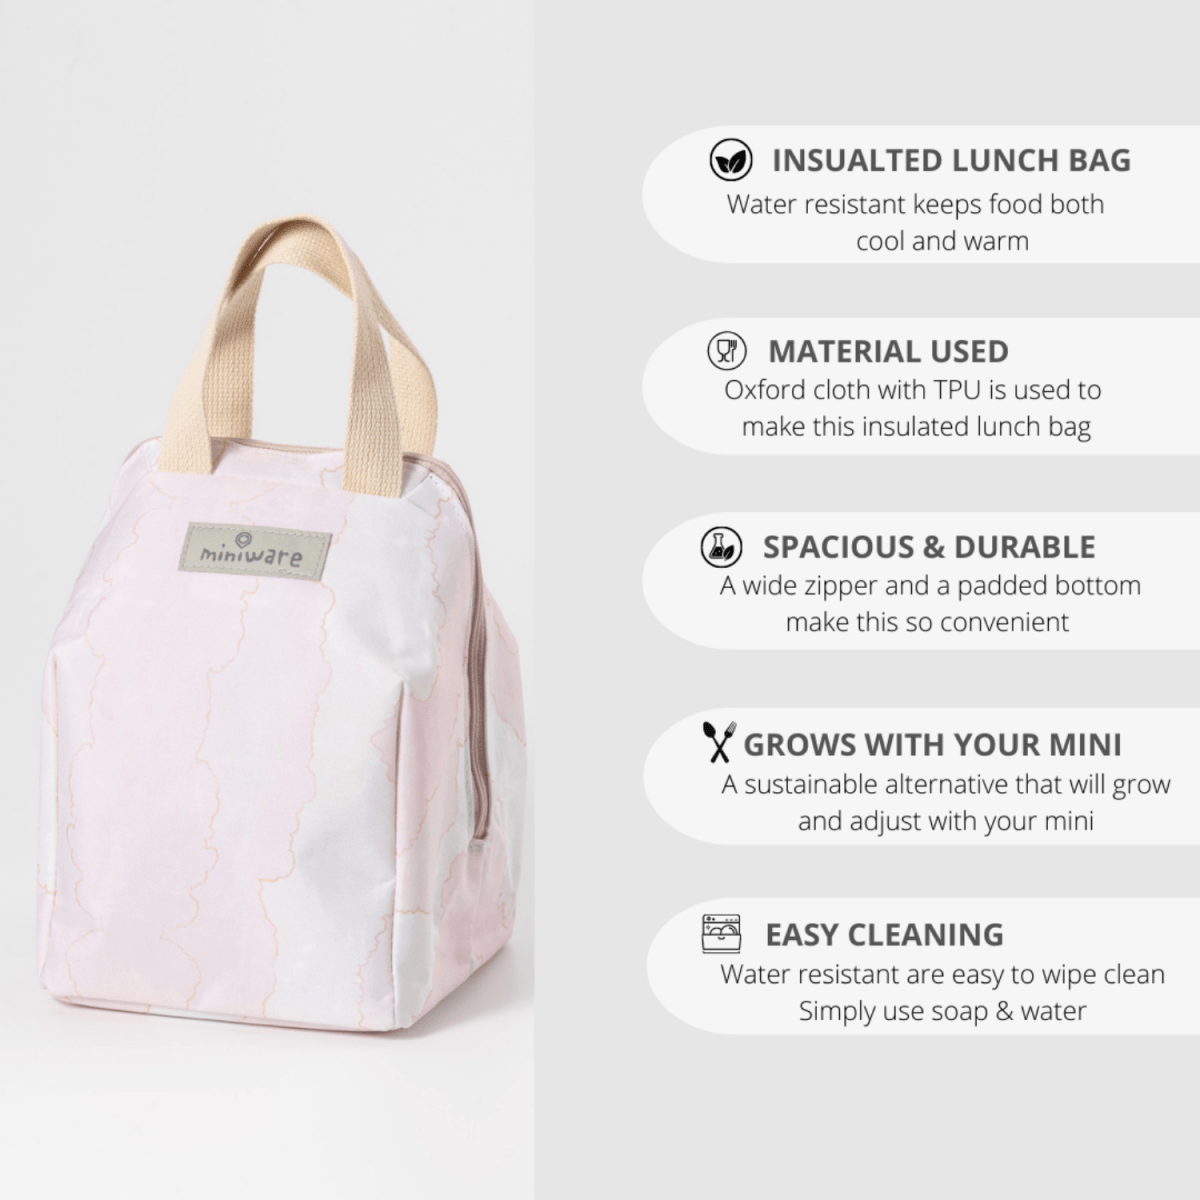 Miniware Mealtote Insulated Lunch Bag- Pink Cloud - MTPC